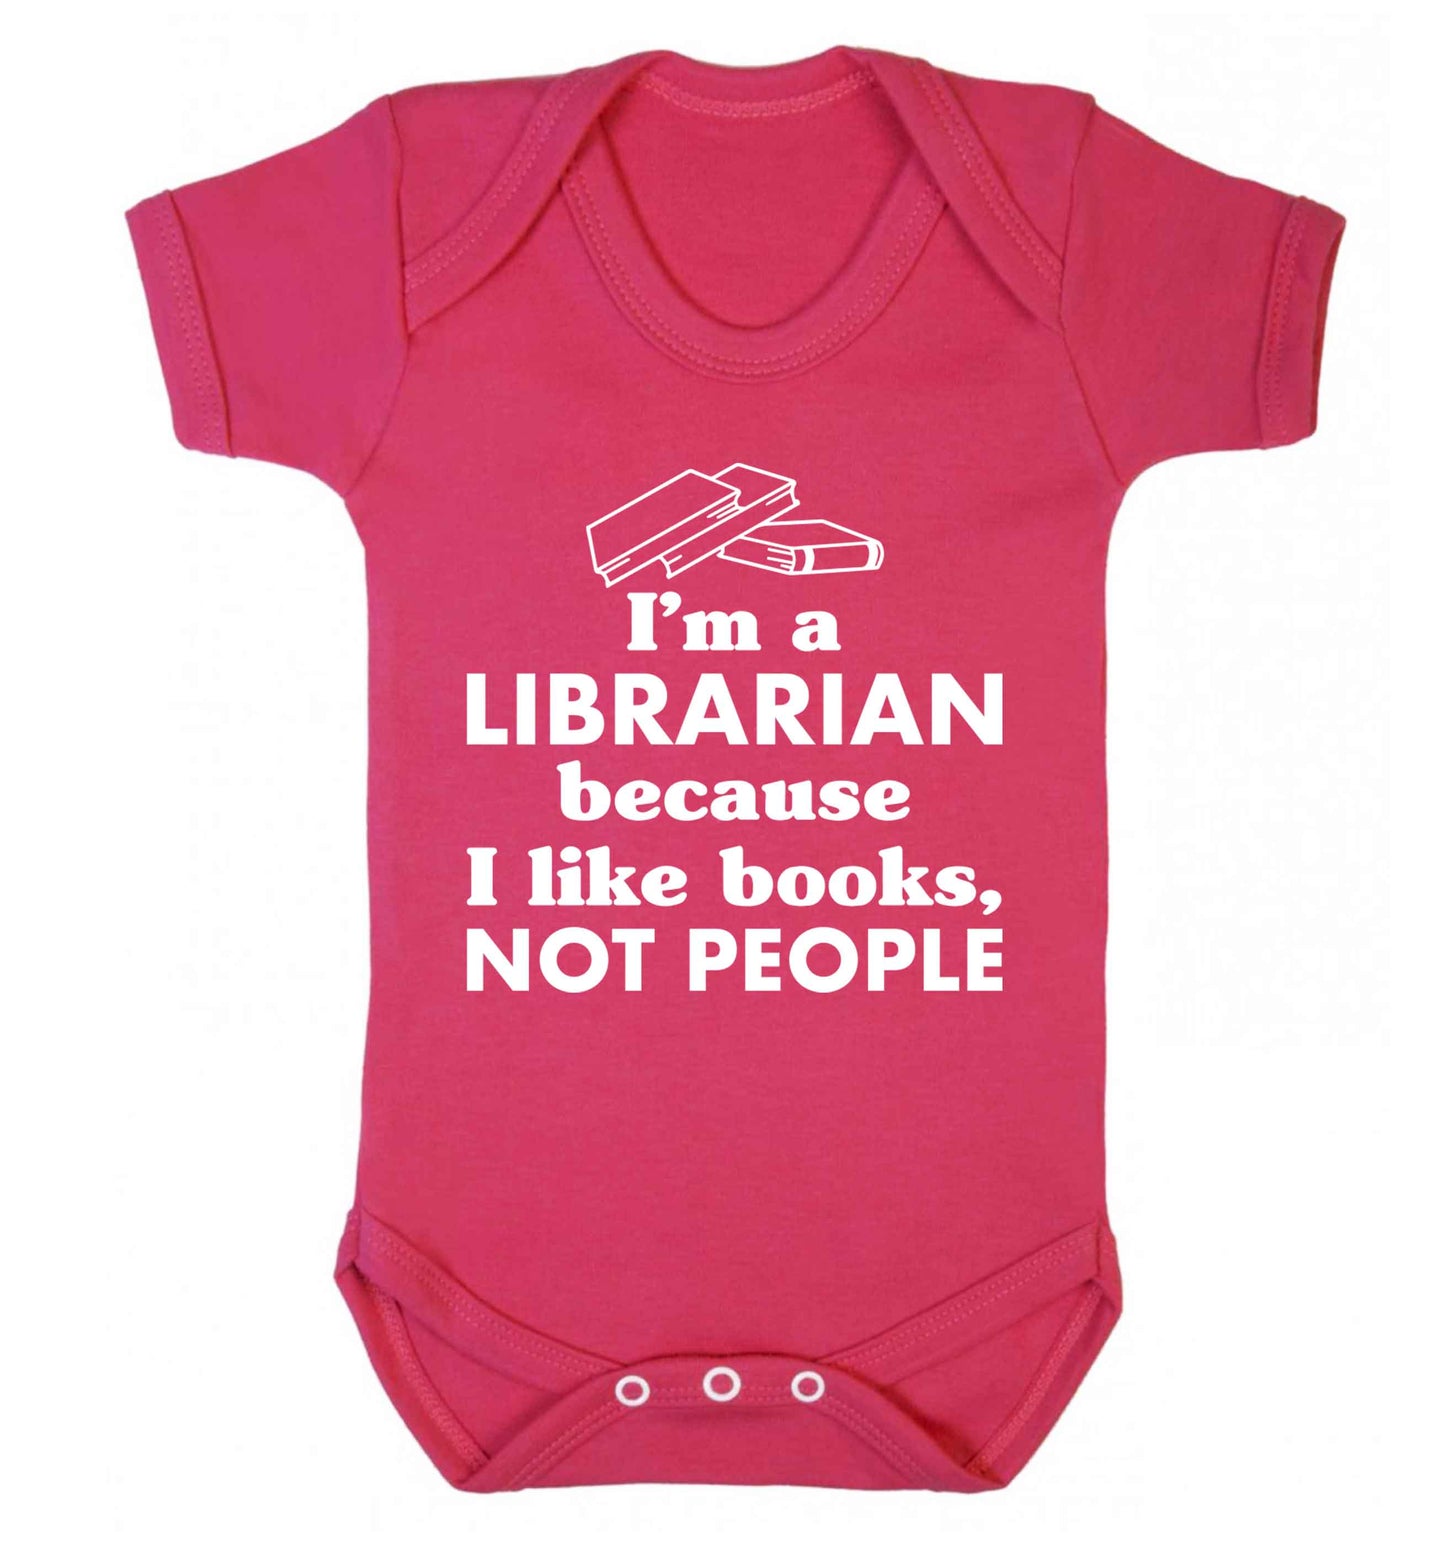 I'm a librarian because I like books not people Baby Vest dark pink 18-24 months